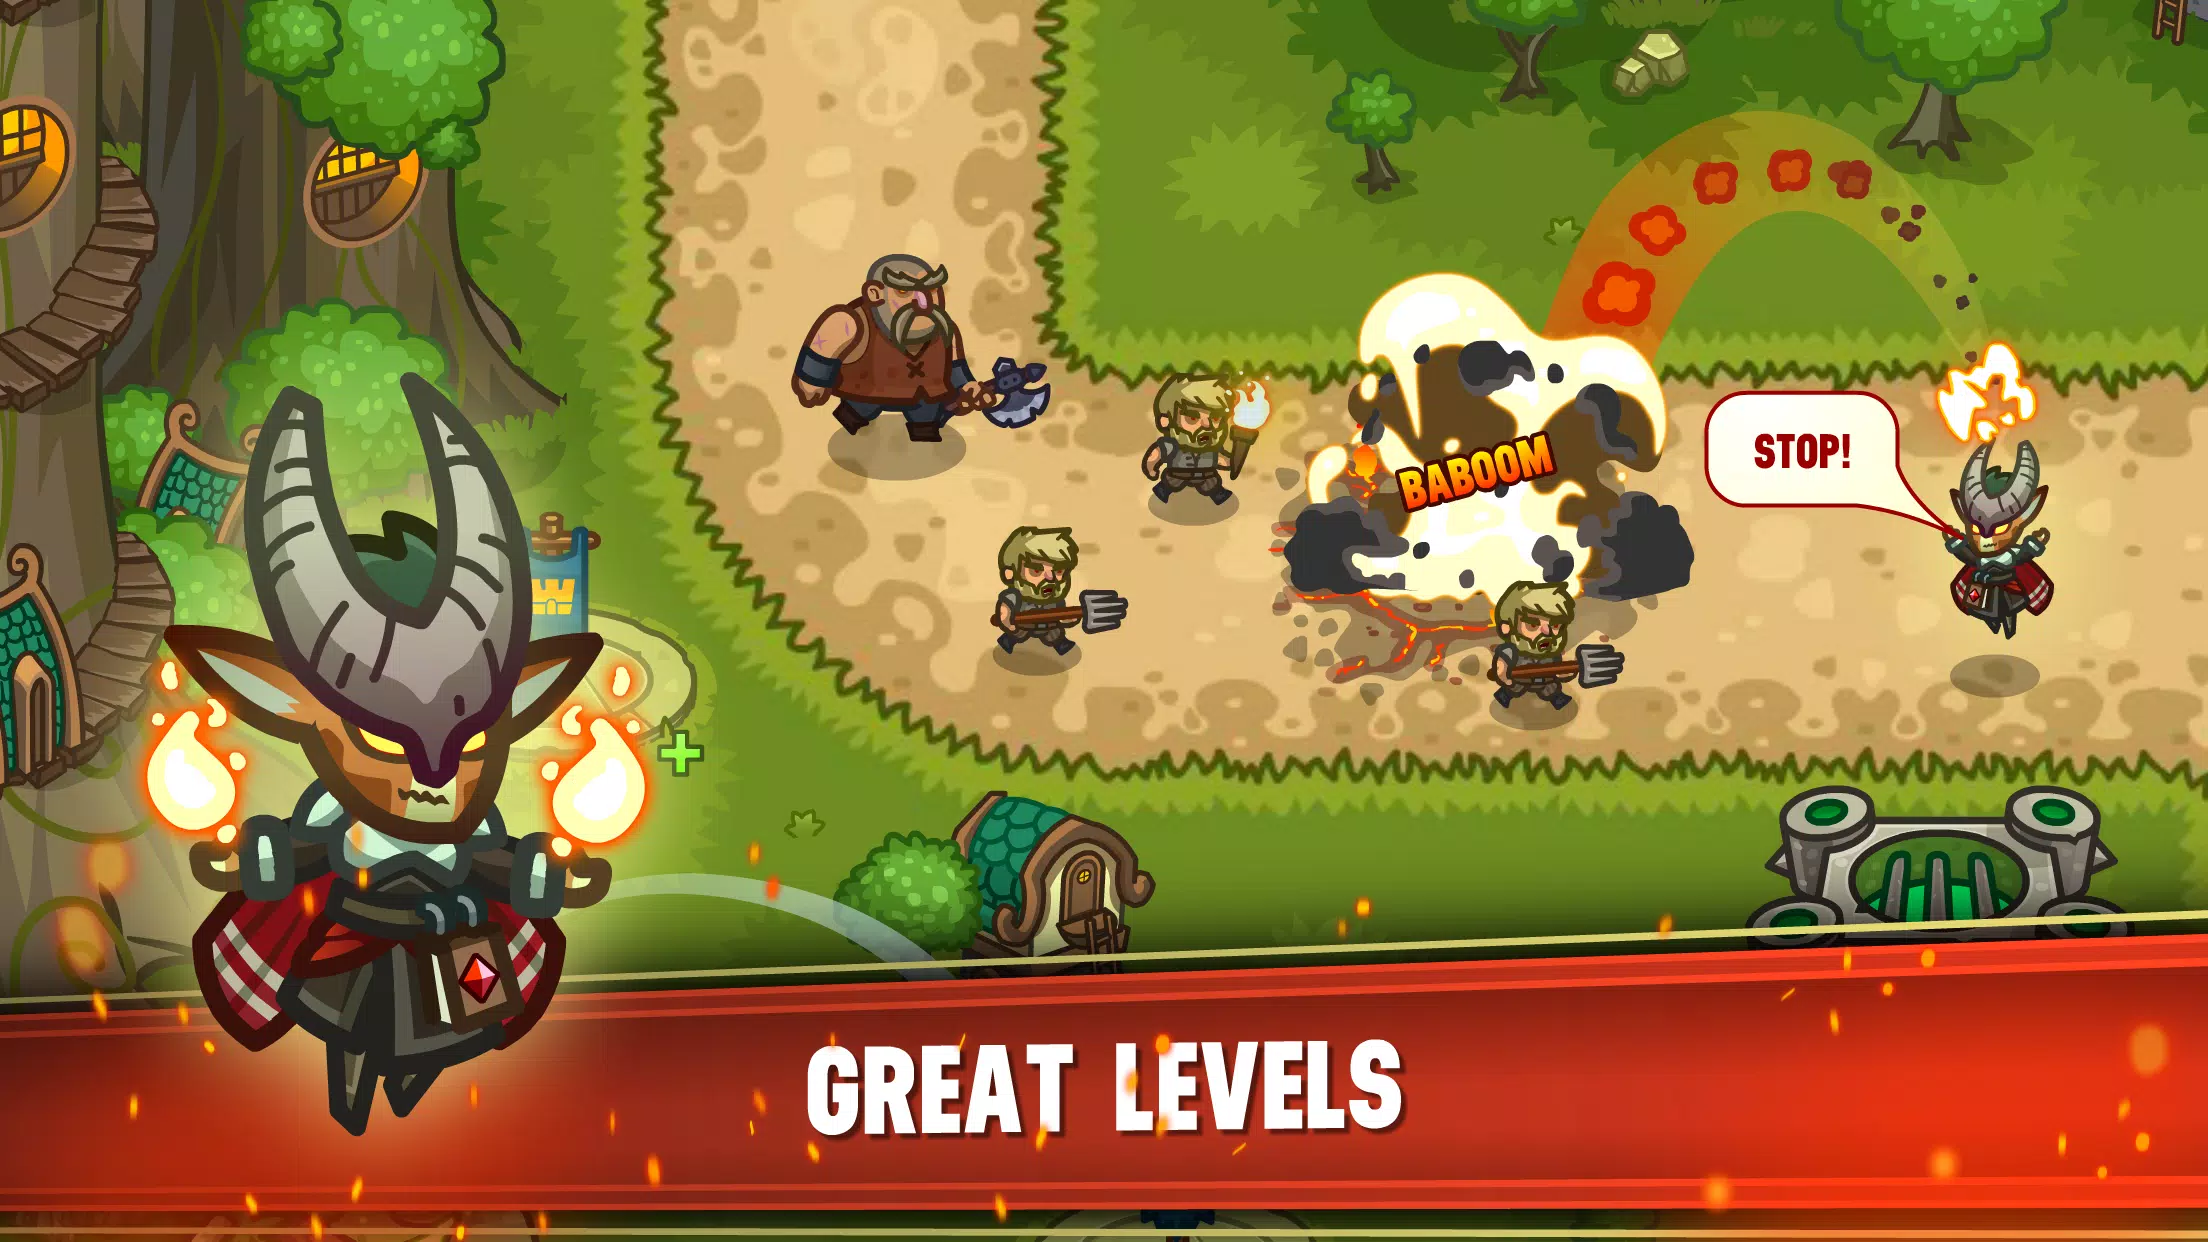 Android Giveaway of the Day - Tower Defense: Magic Quest